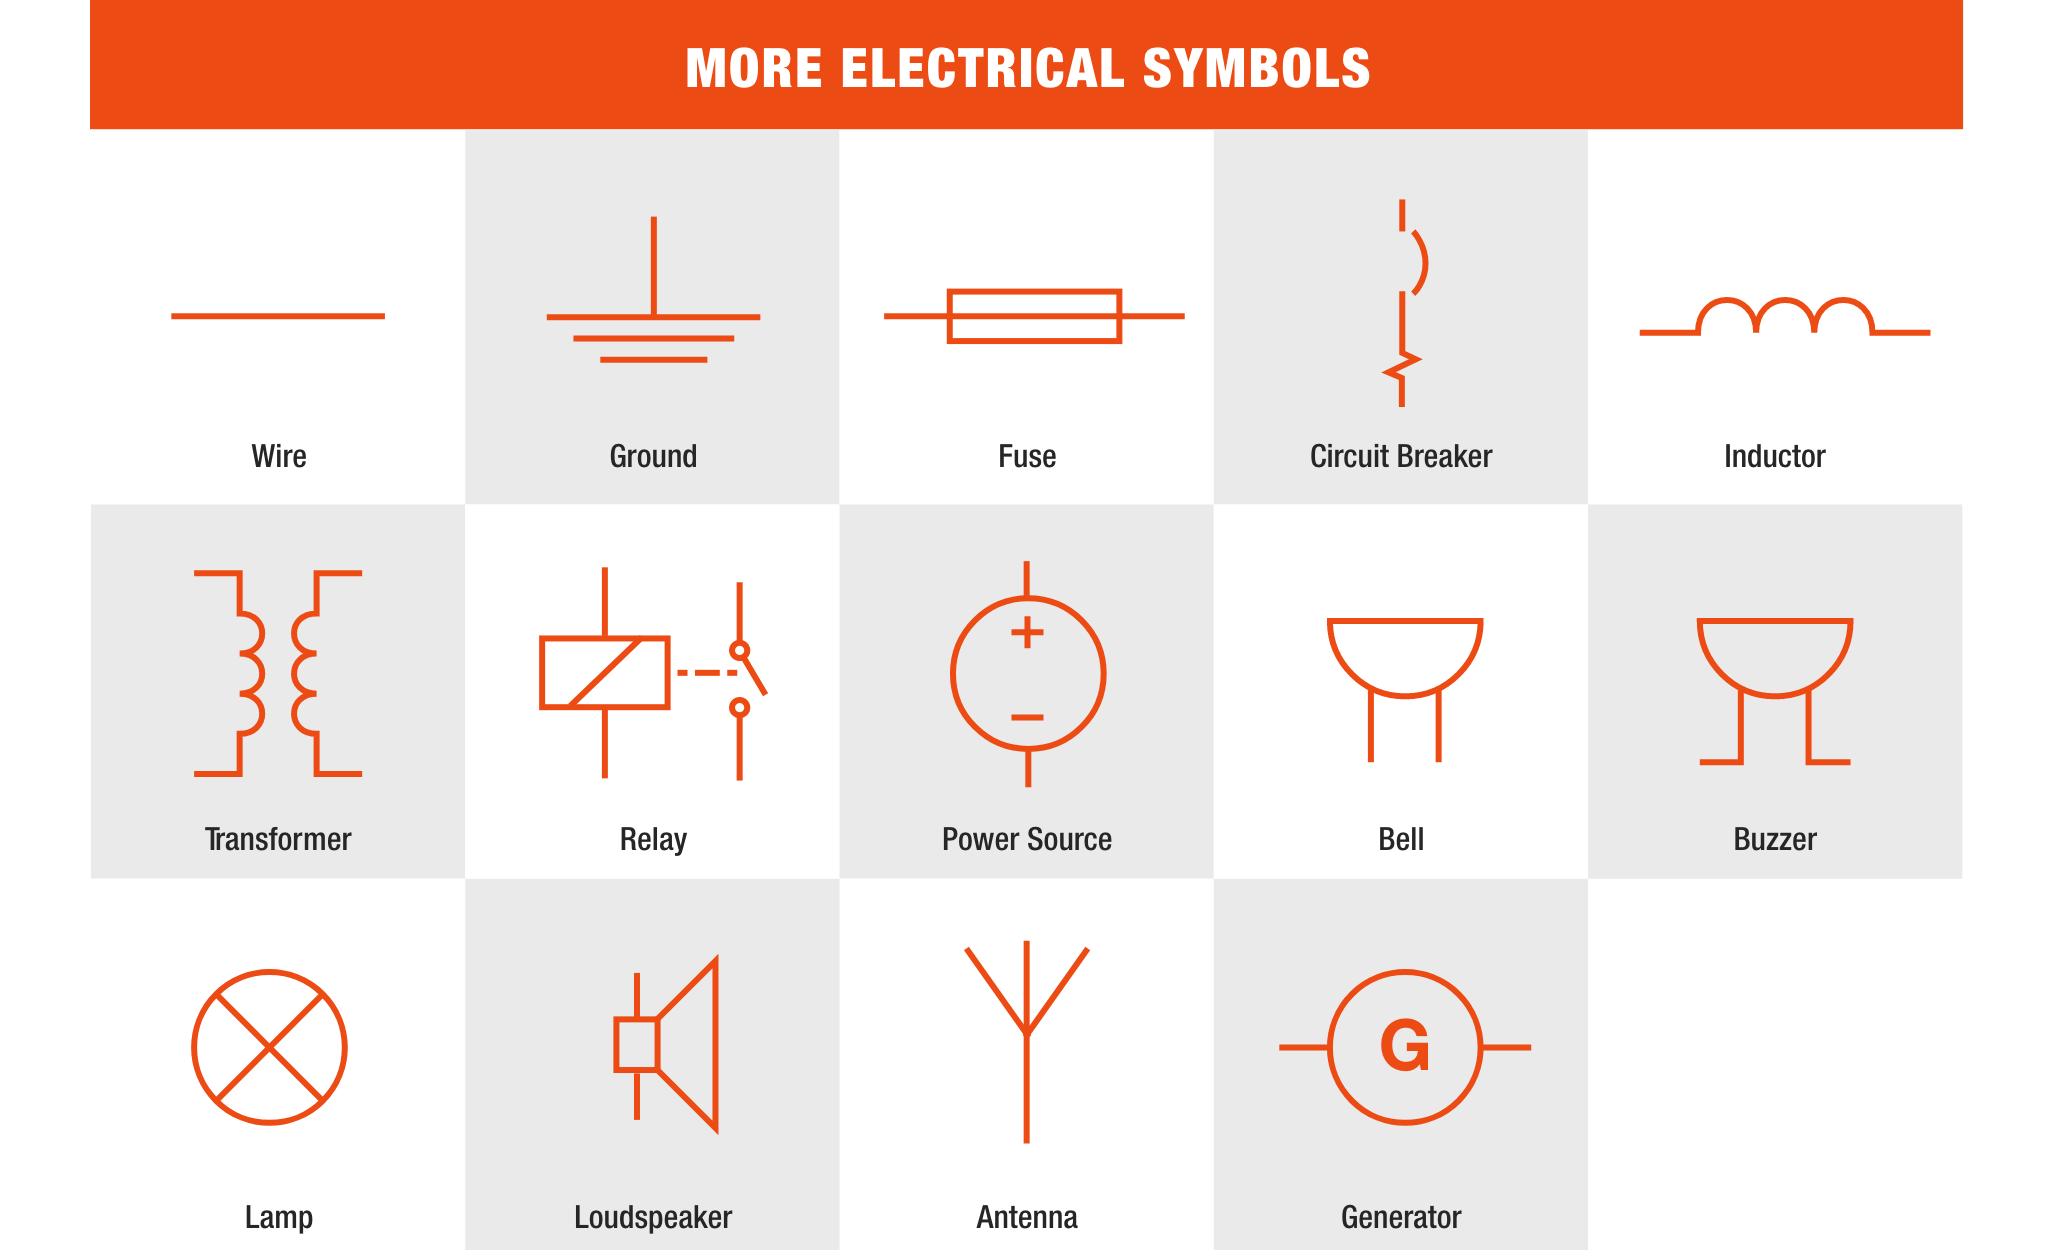 A graphic shows more electrical symbols.